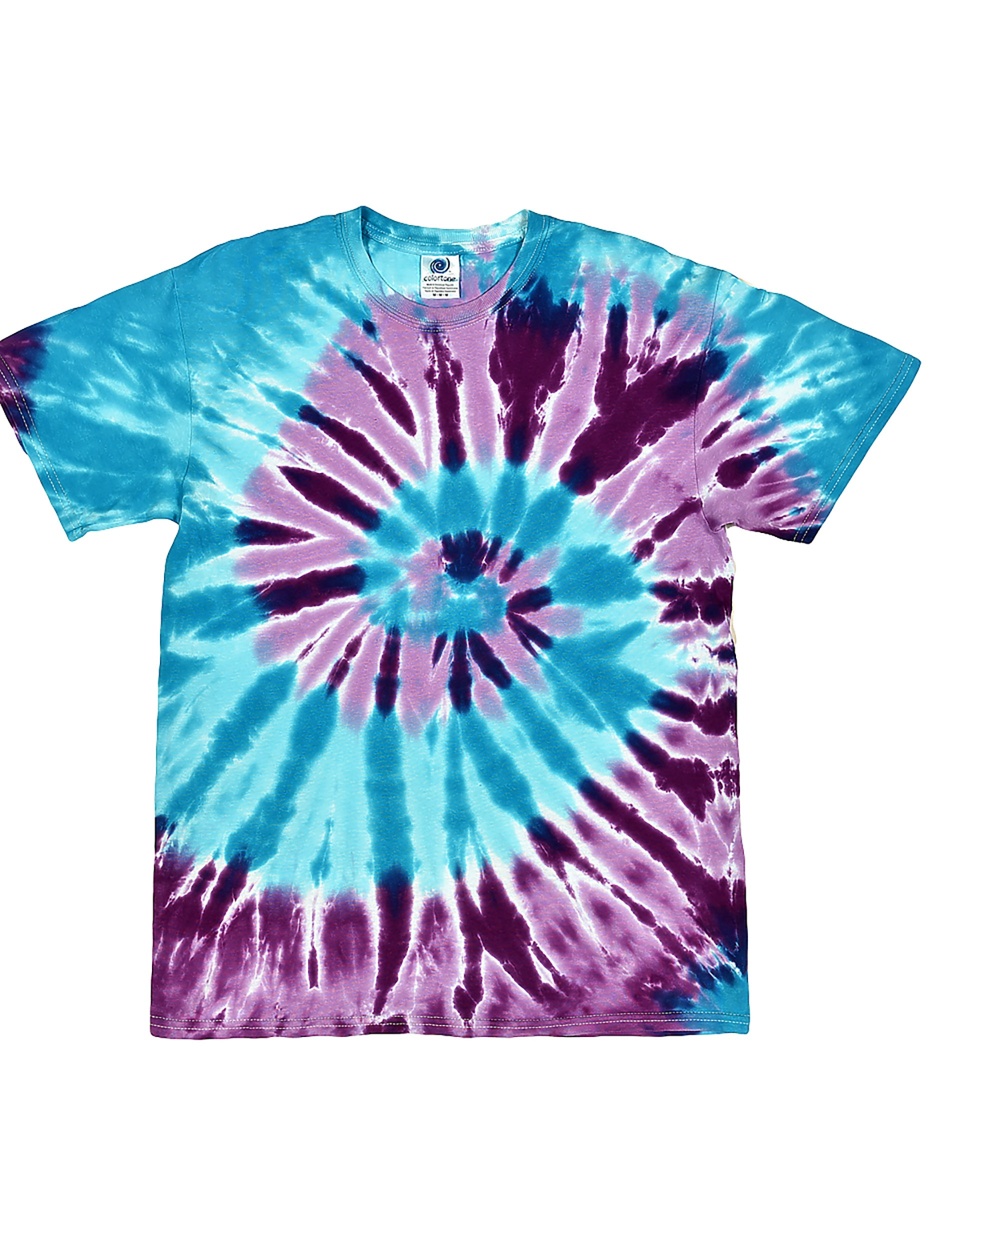 TD954 - Tie Dye Reactive Dyed Tee - One Stop